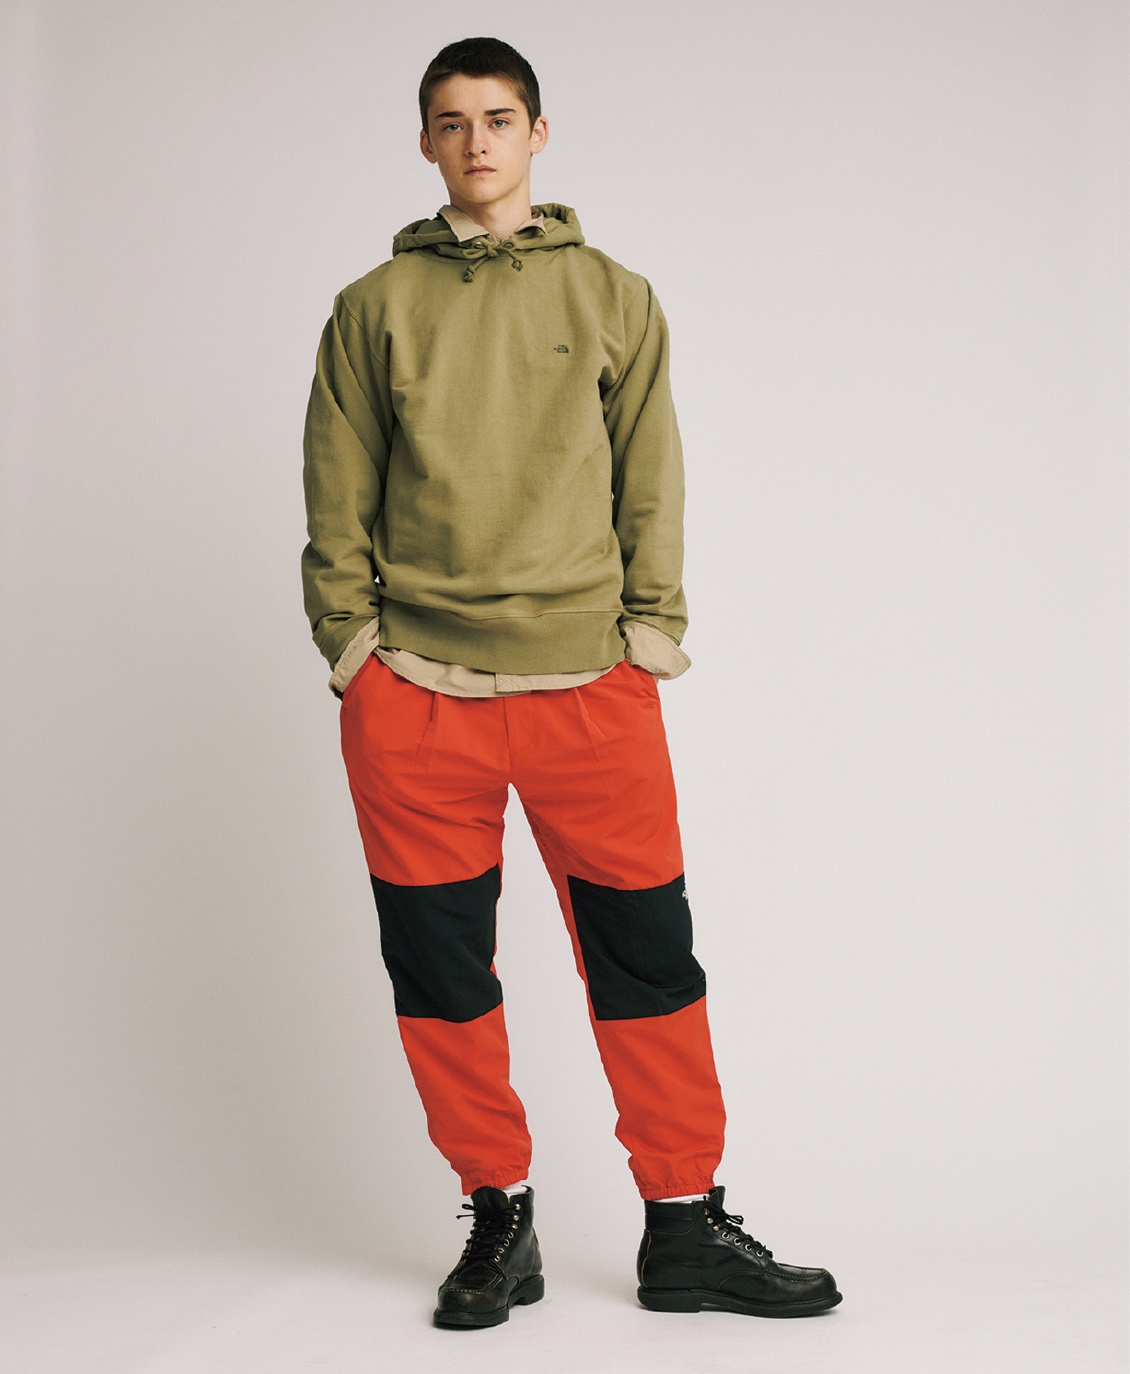 The North Face Purple Label Spring/Summer 18 — eye_C